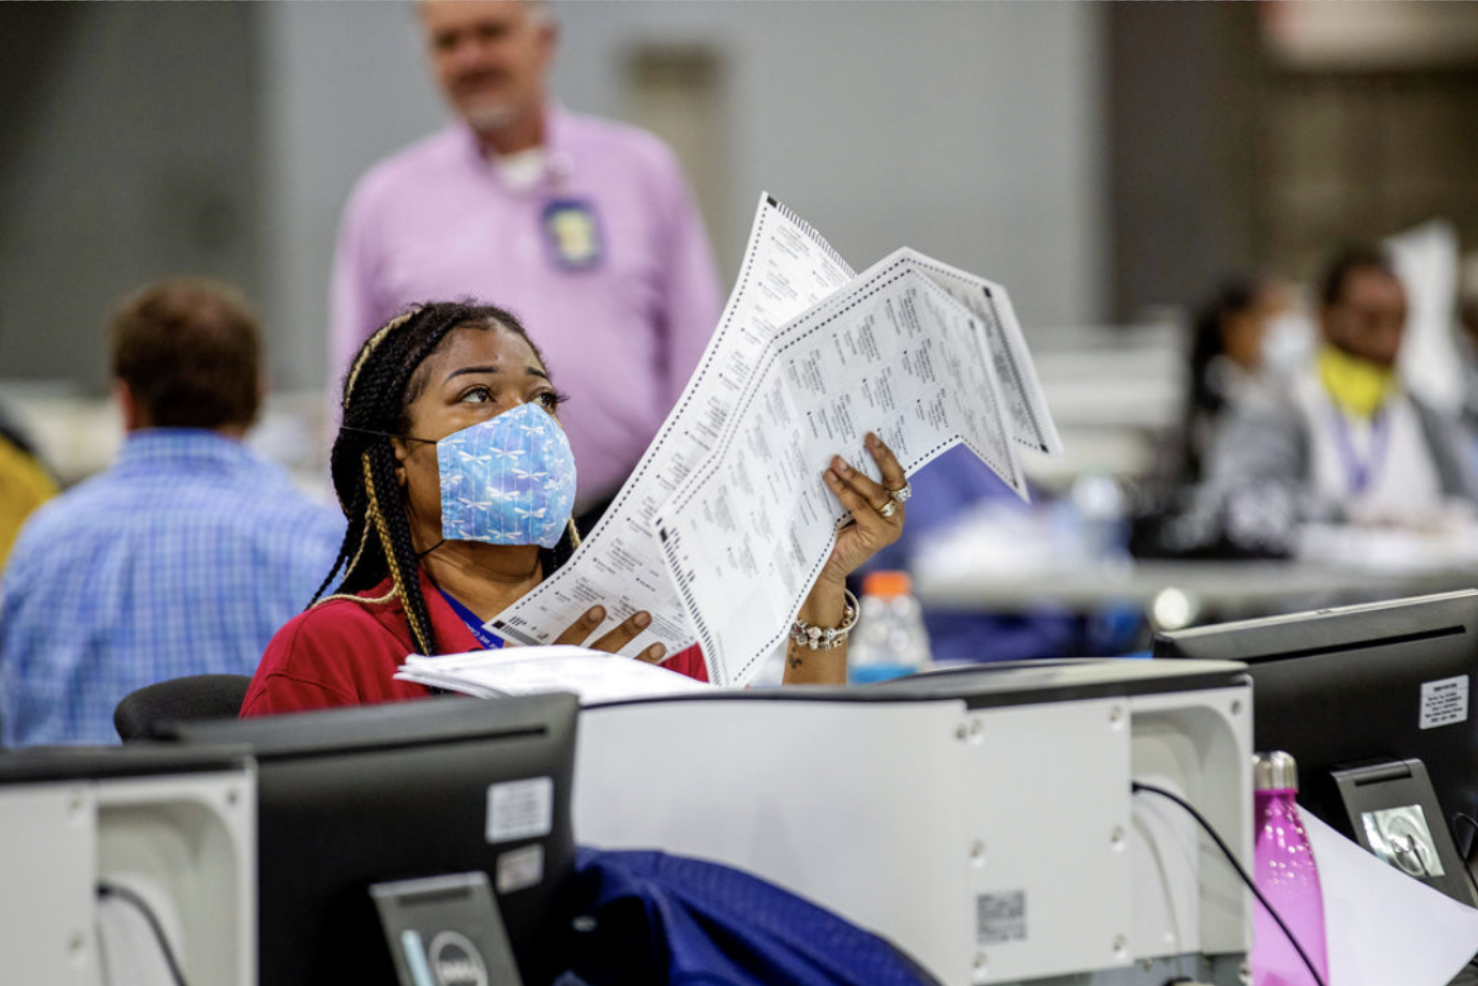 Voting by mail hasn’t given a big advantage to one political party, but Republican rhetoric could change the dynamic for November’s election. ALYSSA POINTER/ATLANTA JOURNAL-CONSTITUTION VIA AP